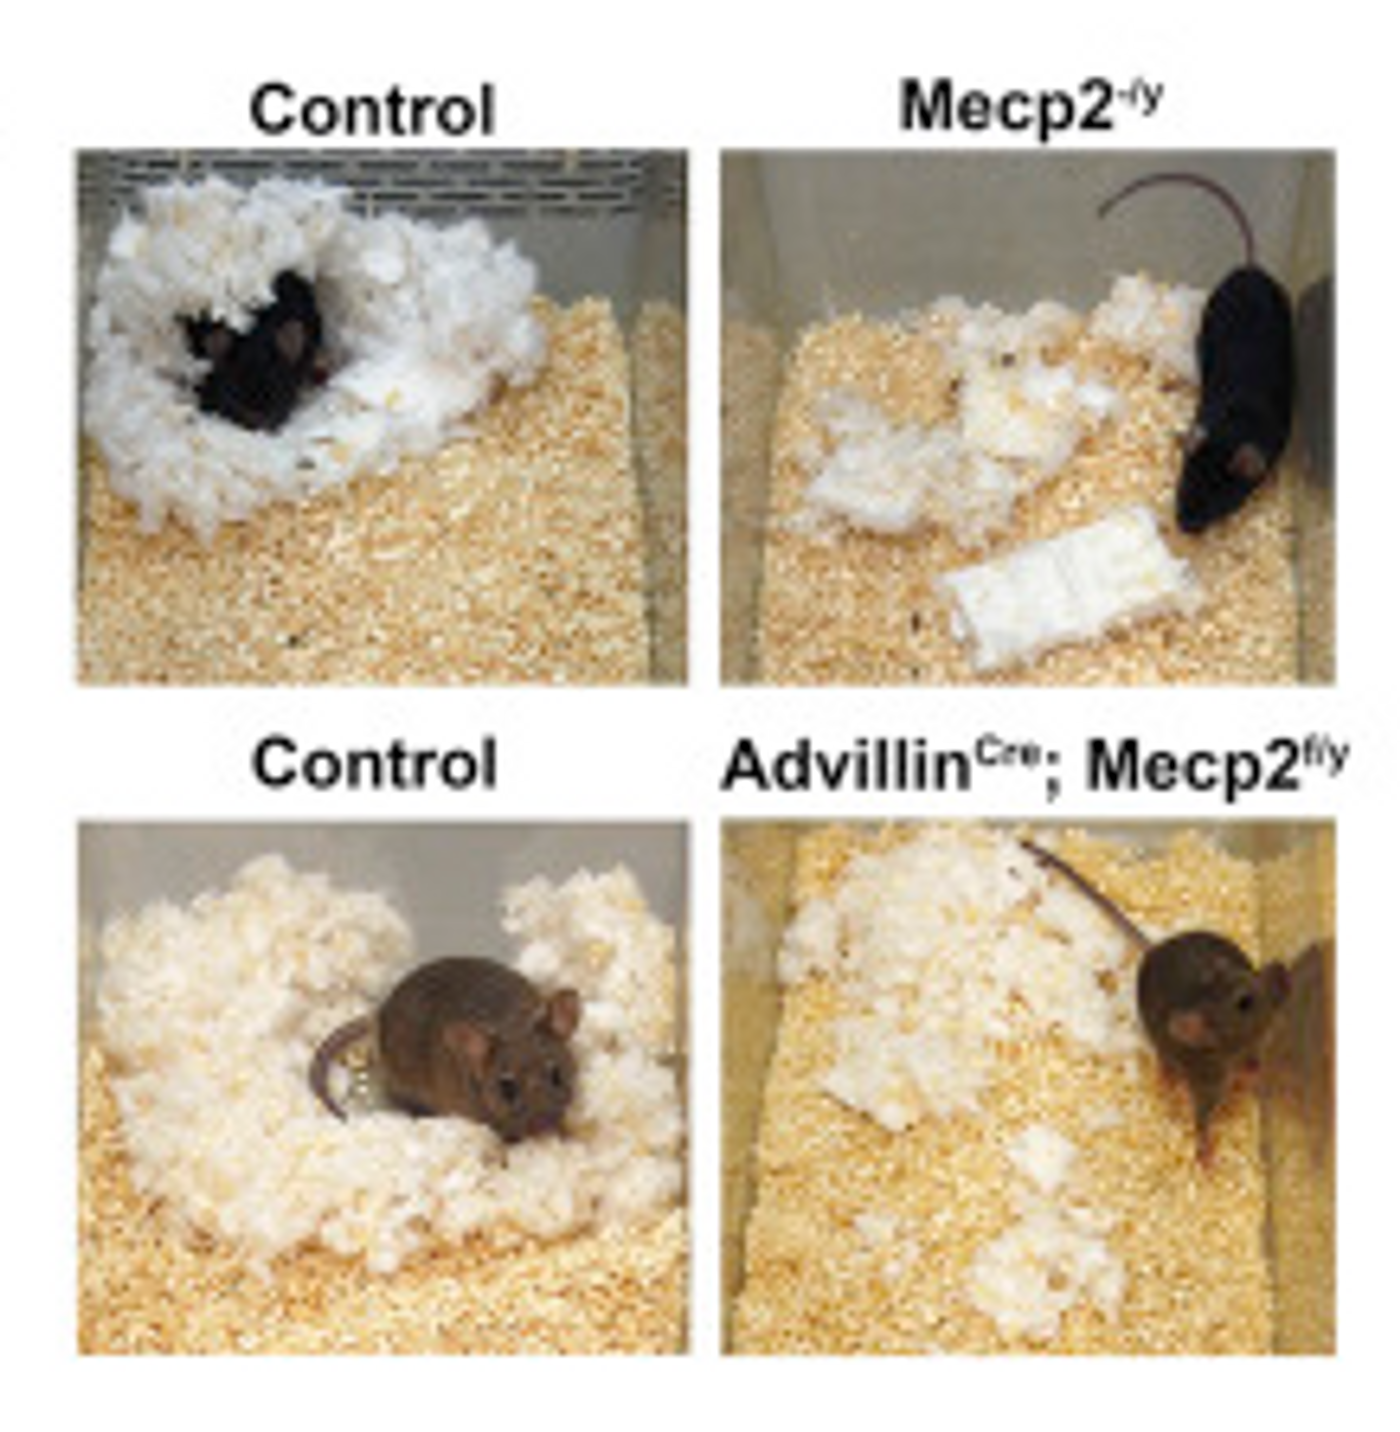 From the study, nest building behavior, a measure of health, welfare and anxiety, is shown for Mecp2?/y and AdvillinCre; Mecp2f/y mutant mice and control littermates.